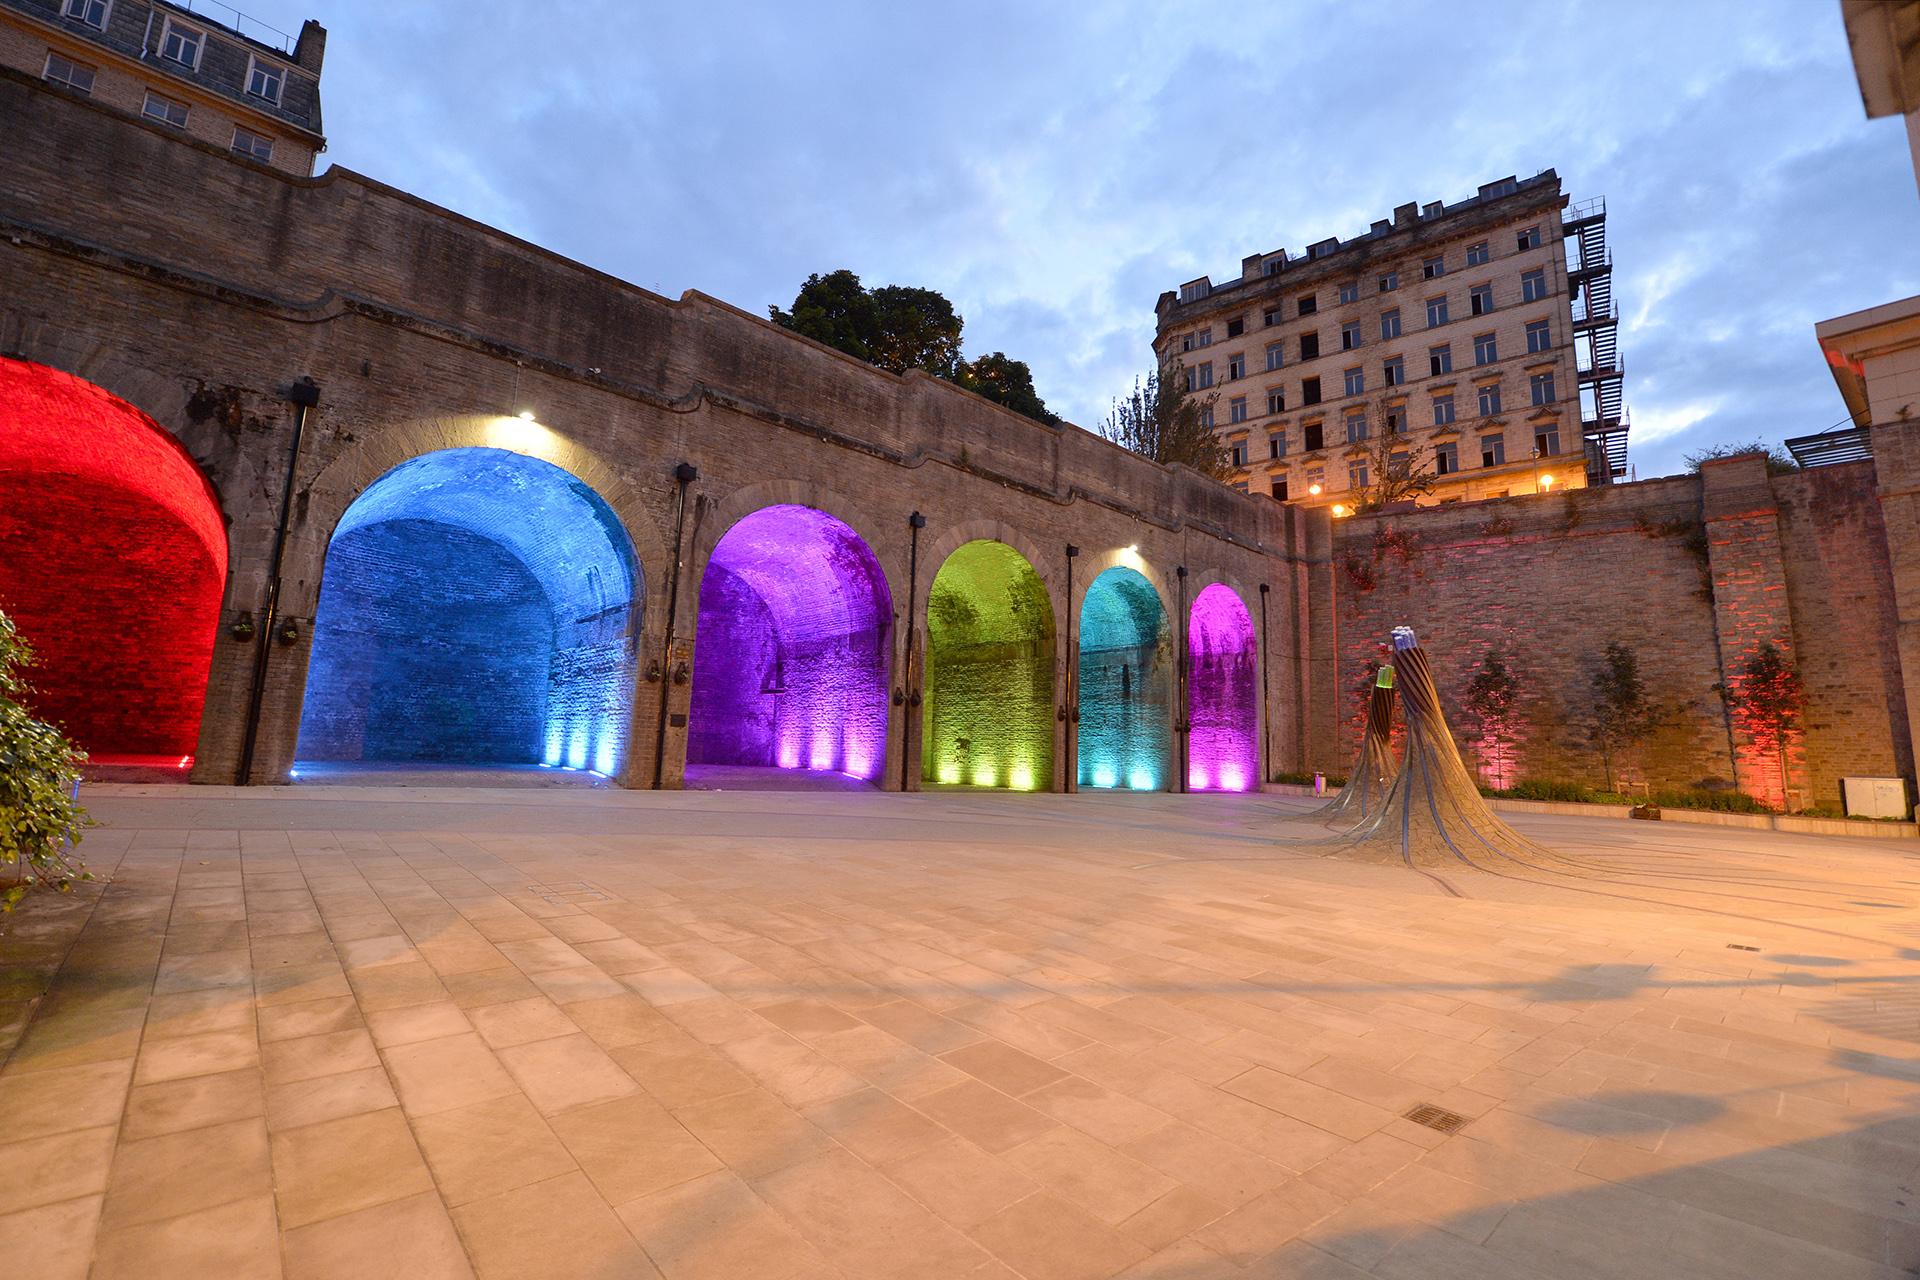 SCULPline floodlights have transformed Saint Blaise Square into a warm, welcoming and fun nocturnal landscape